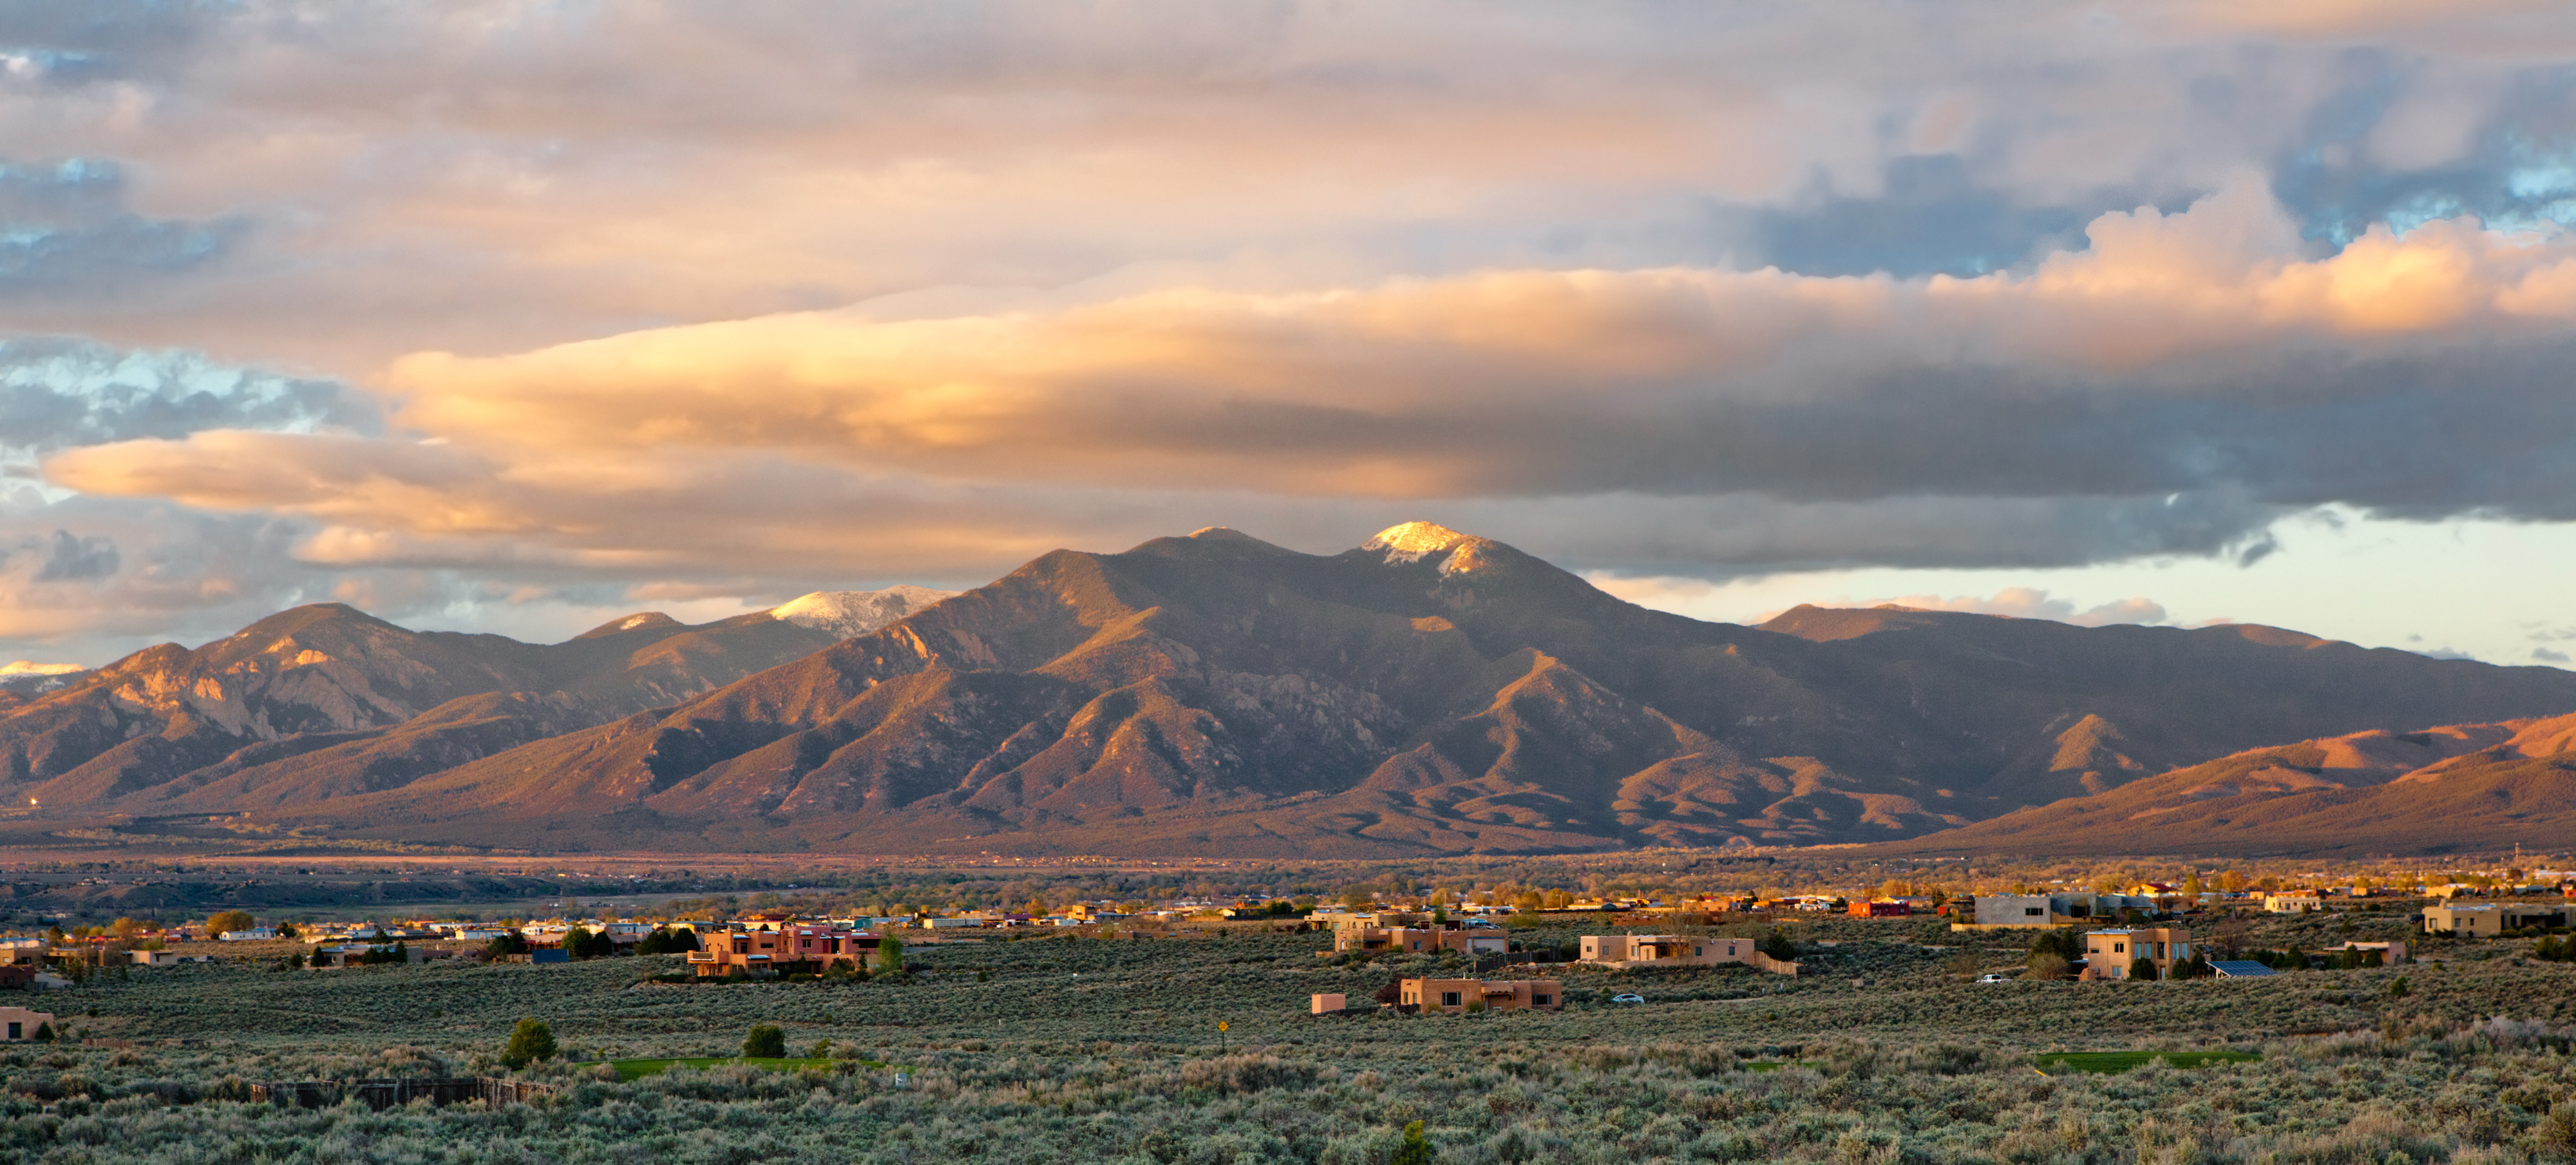 Mountain landscape at sunset with foreground of small town buildings